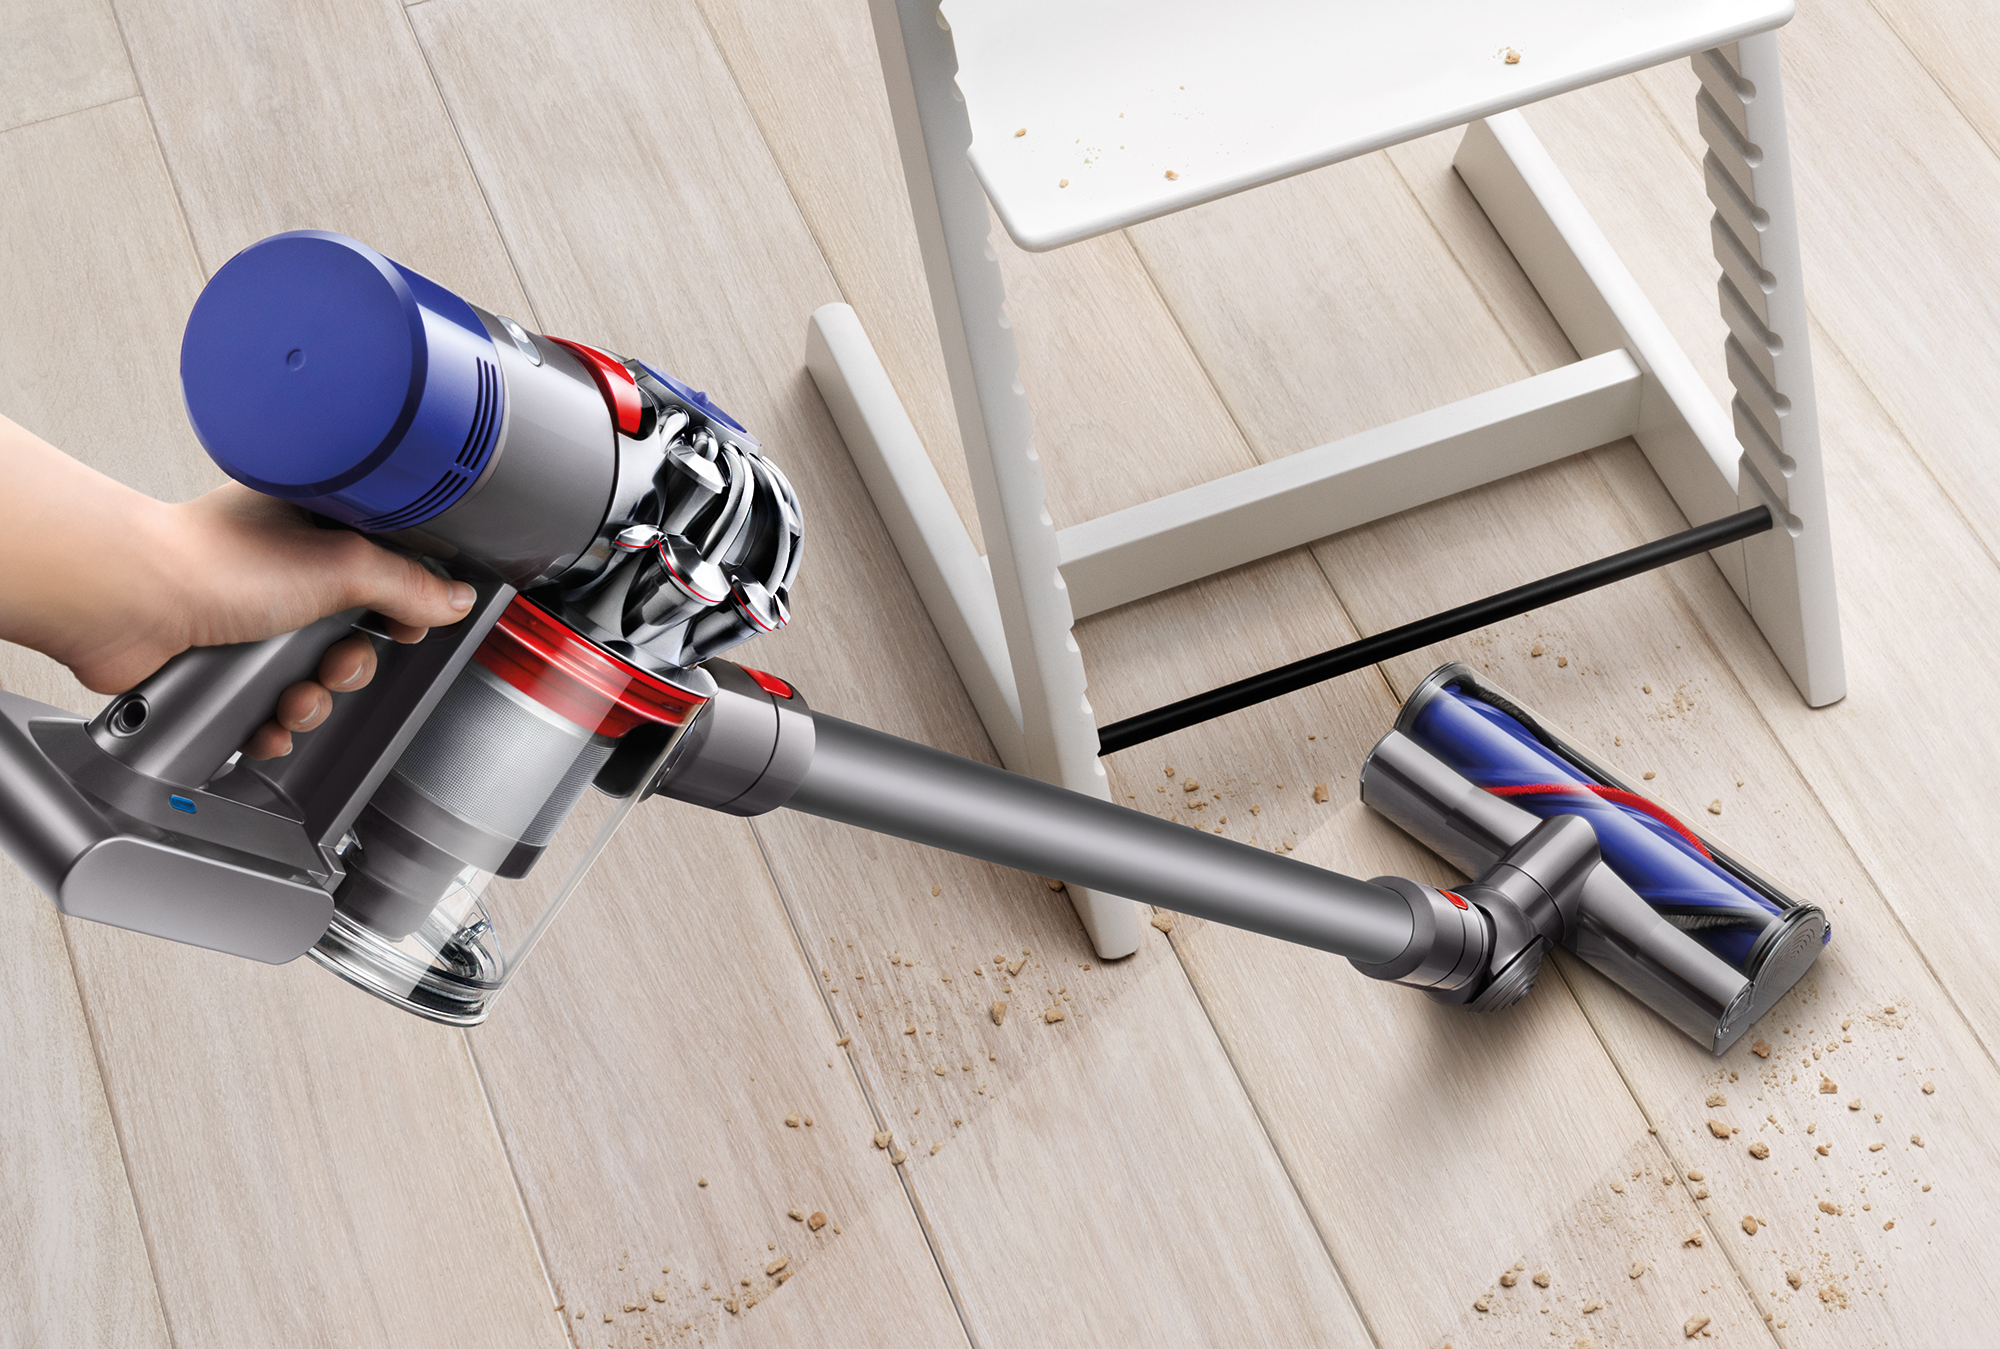 The Dyson V8 Animal Cordless Vacuum Is Discounted by $150 for Cyber Monday | Digital